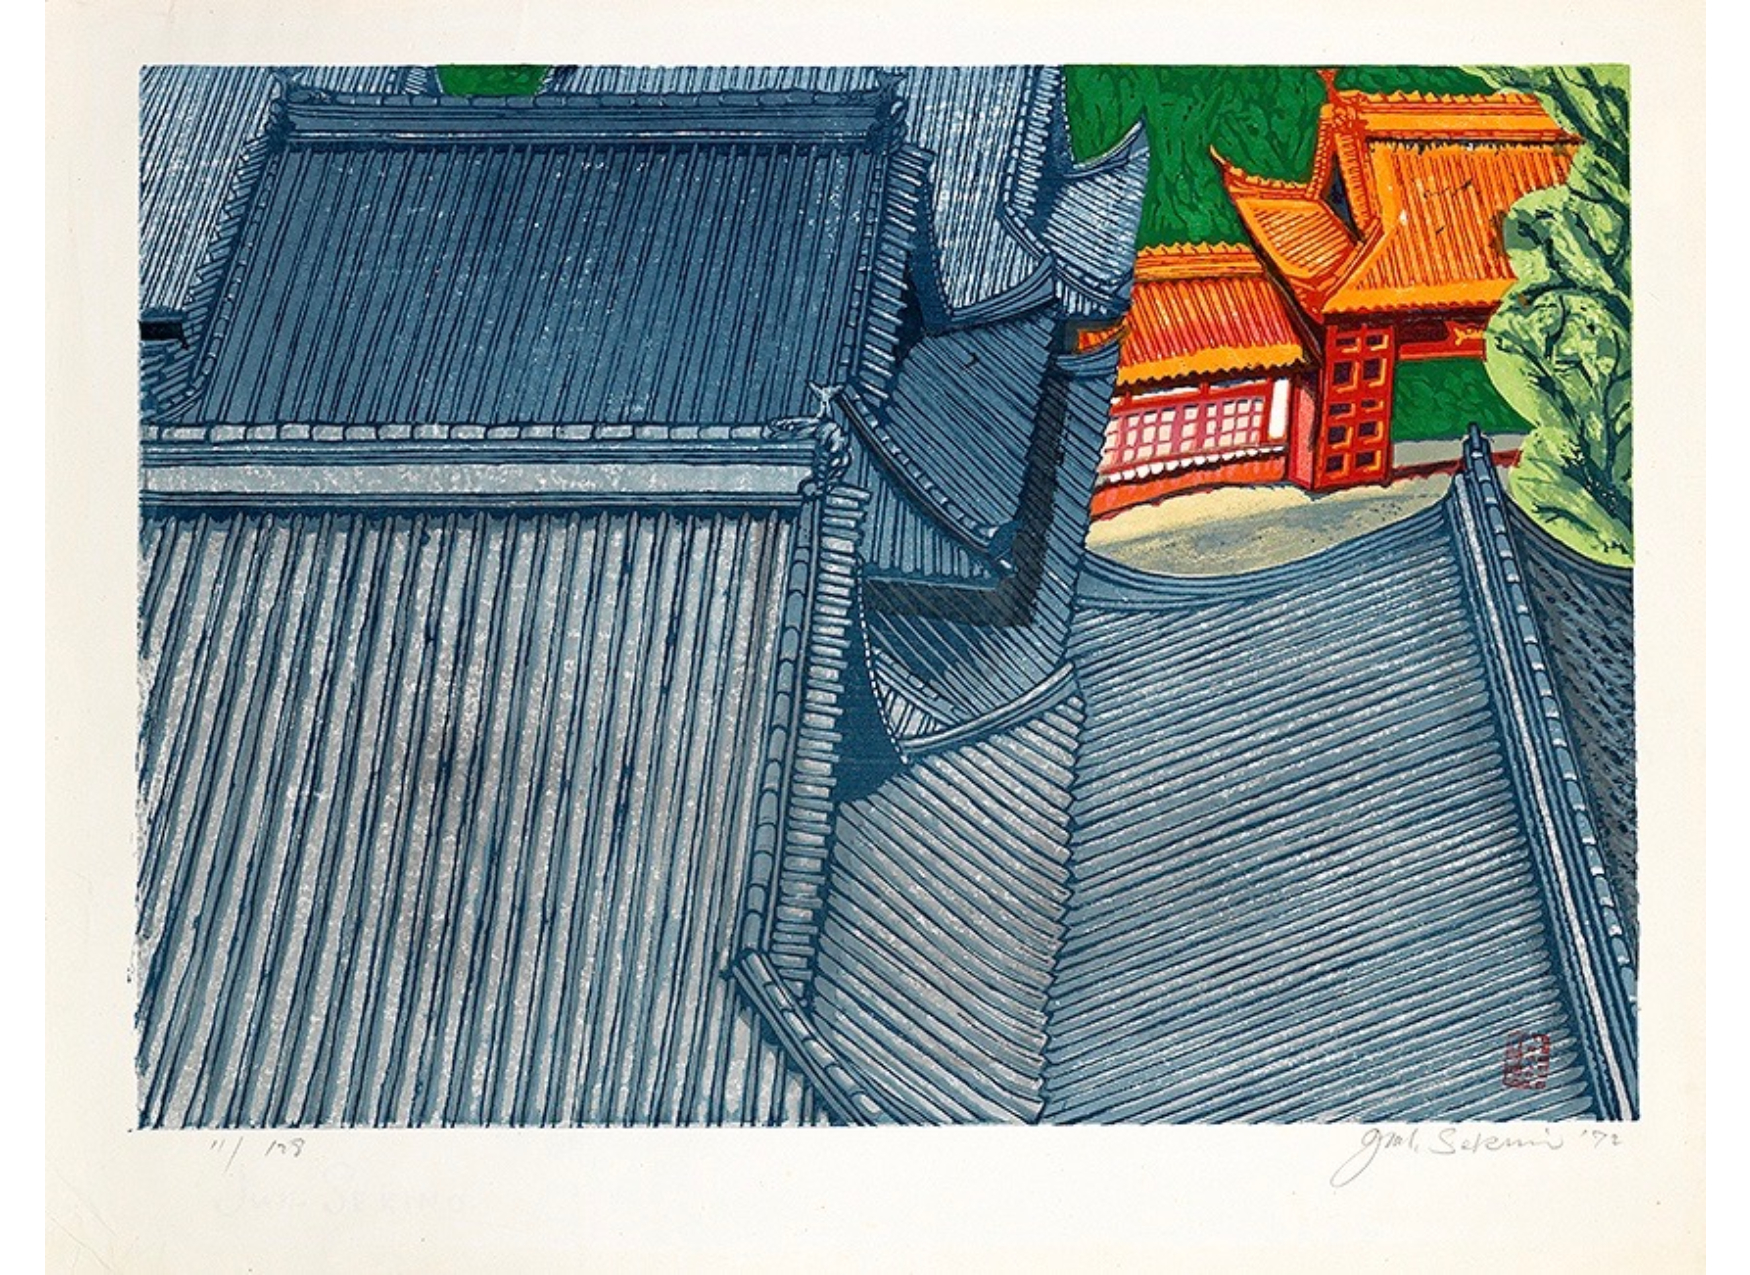 Blue rooftops in foreground of image, red temple in upper proper left, green background.